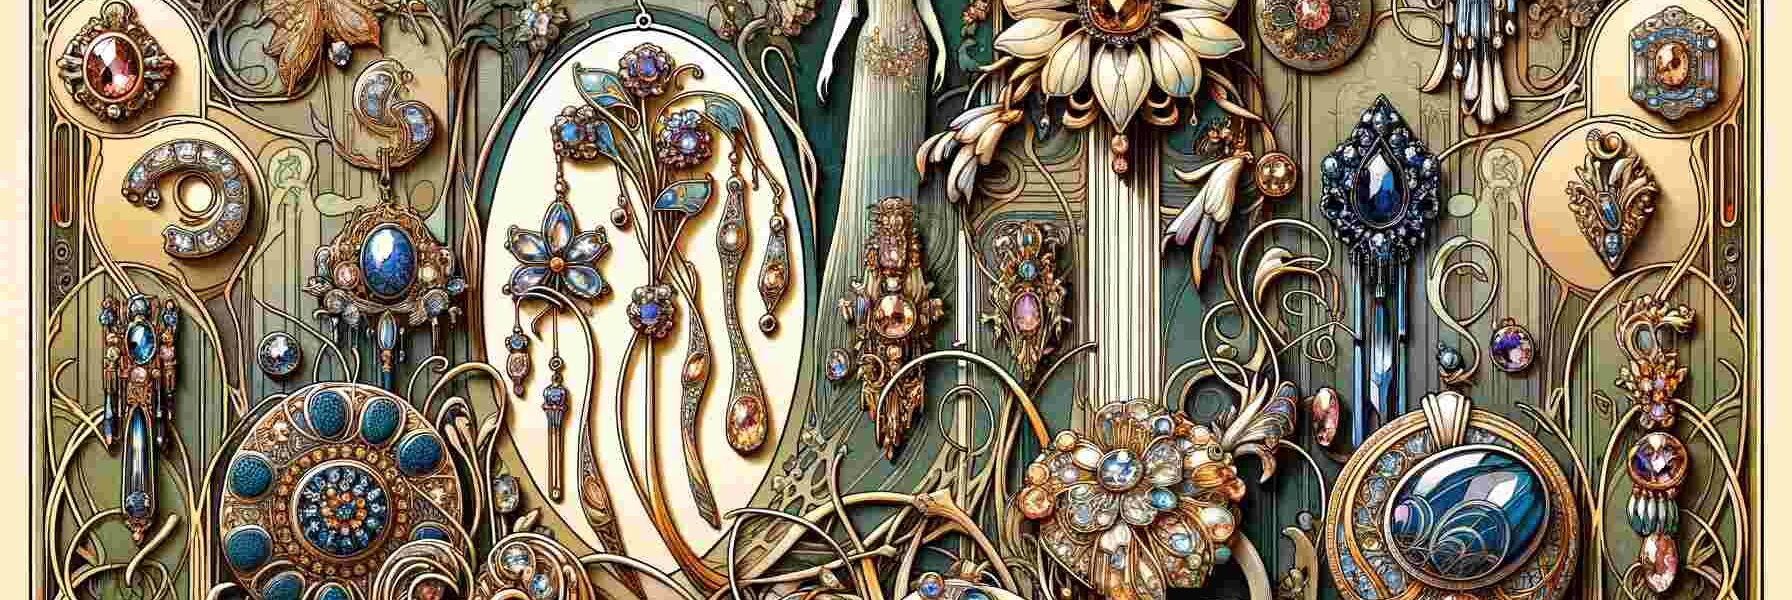 Art Nouveau Postcard Featuring René Lalique'S Jewelry Designs, With Intricate, Ornamental Details And Natural Motifs.